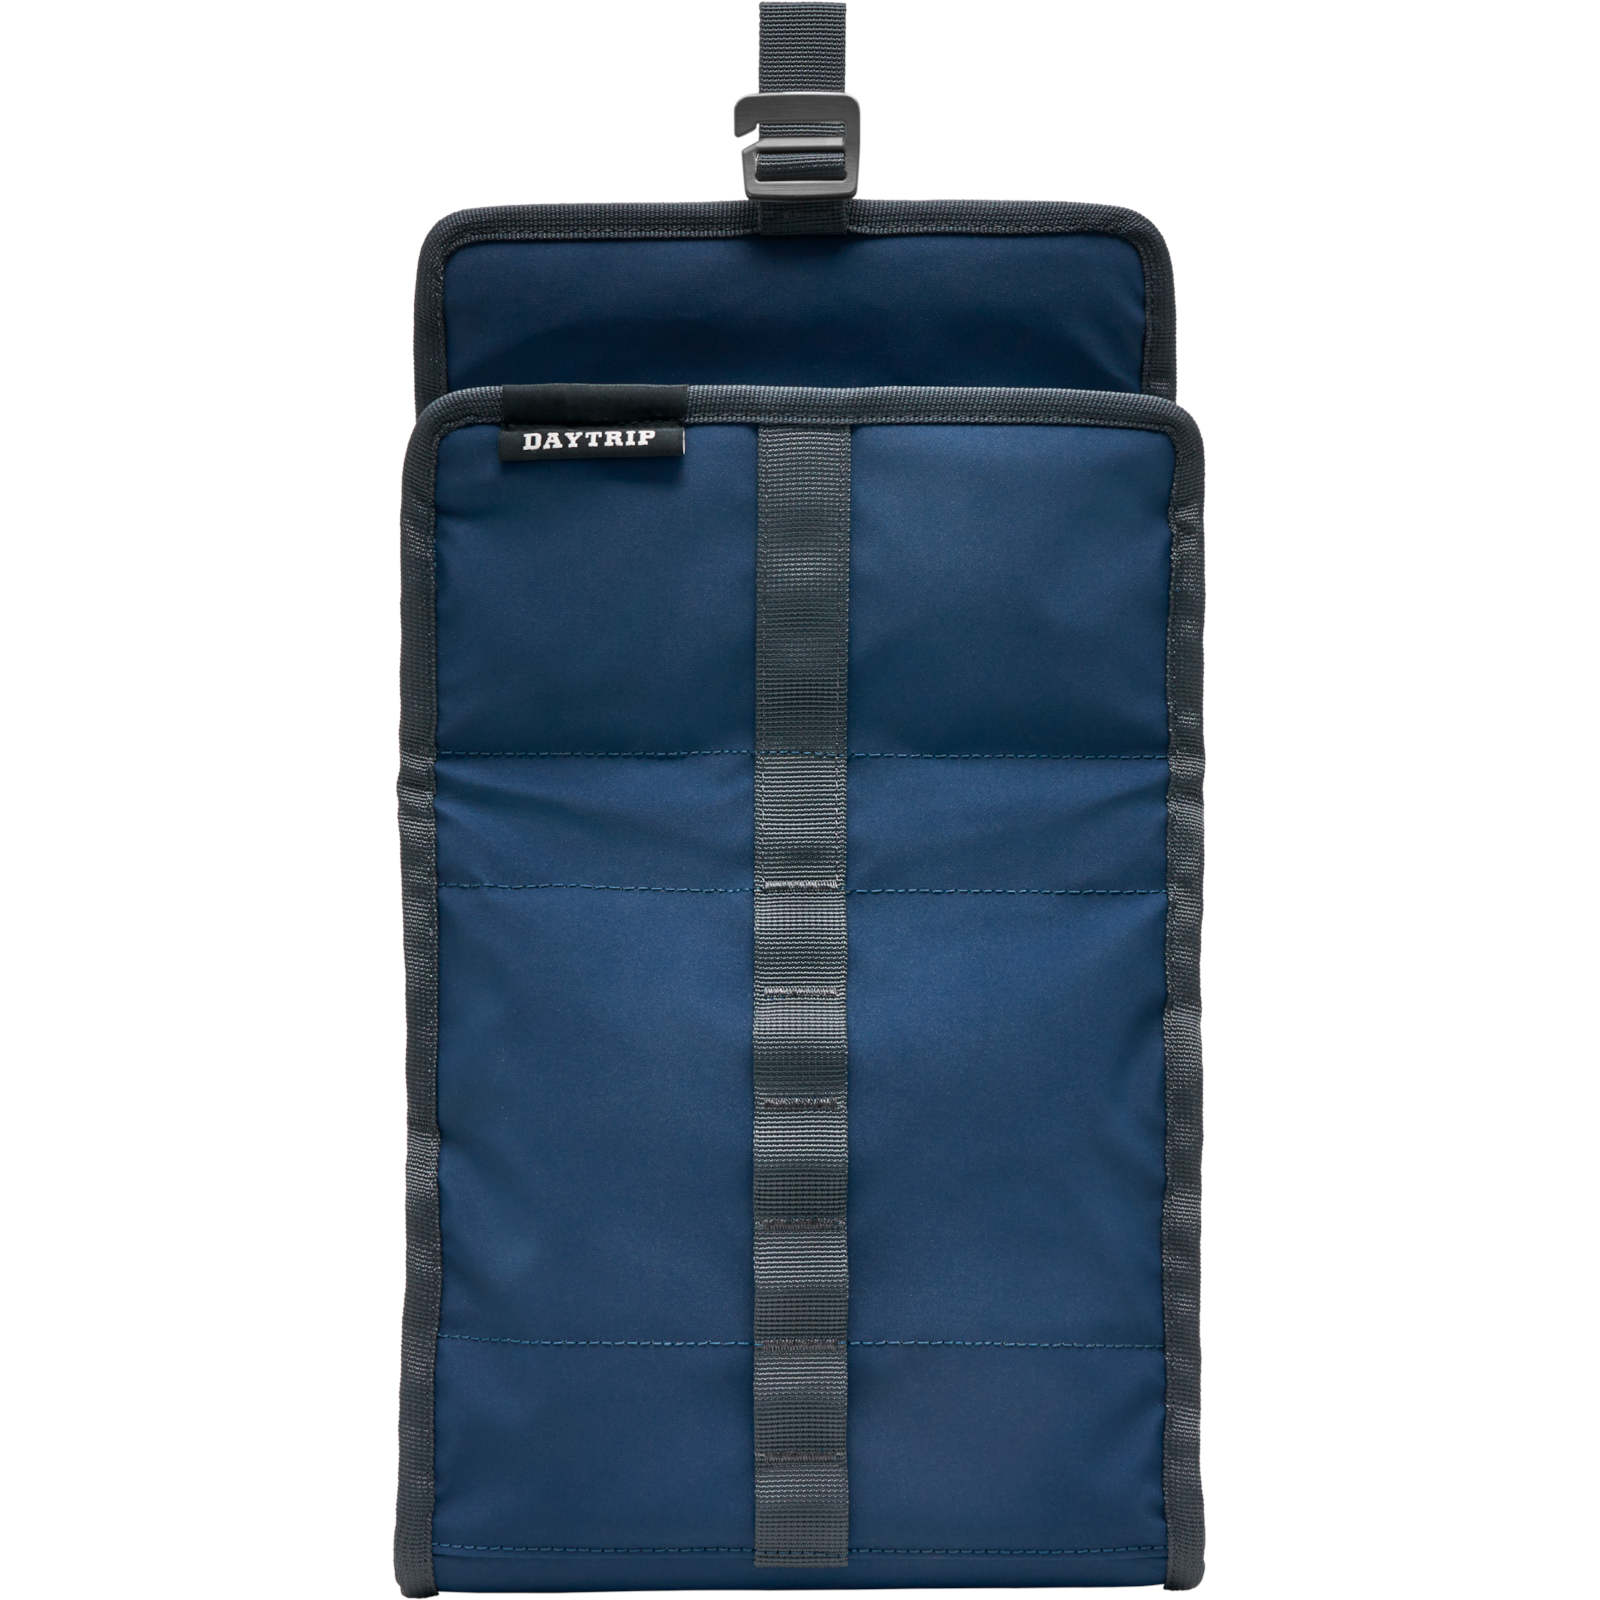 Yeti Day Trip Navy Blue Lunch Bag Unlatched View